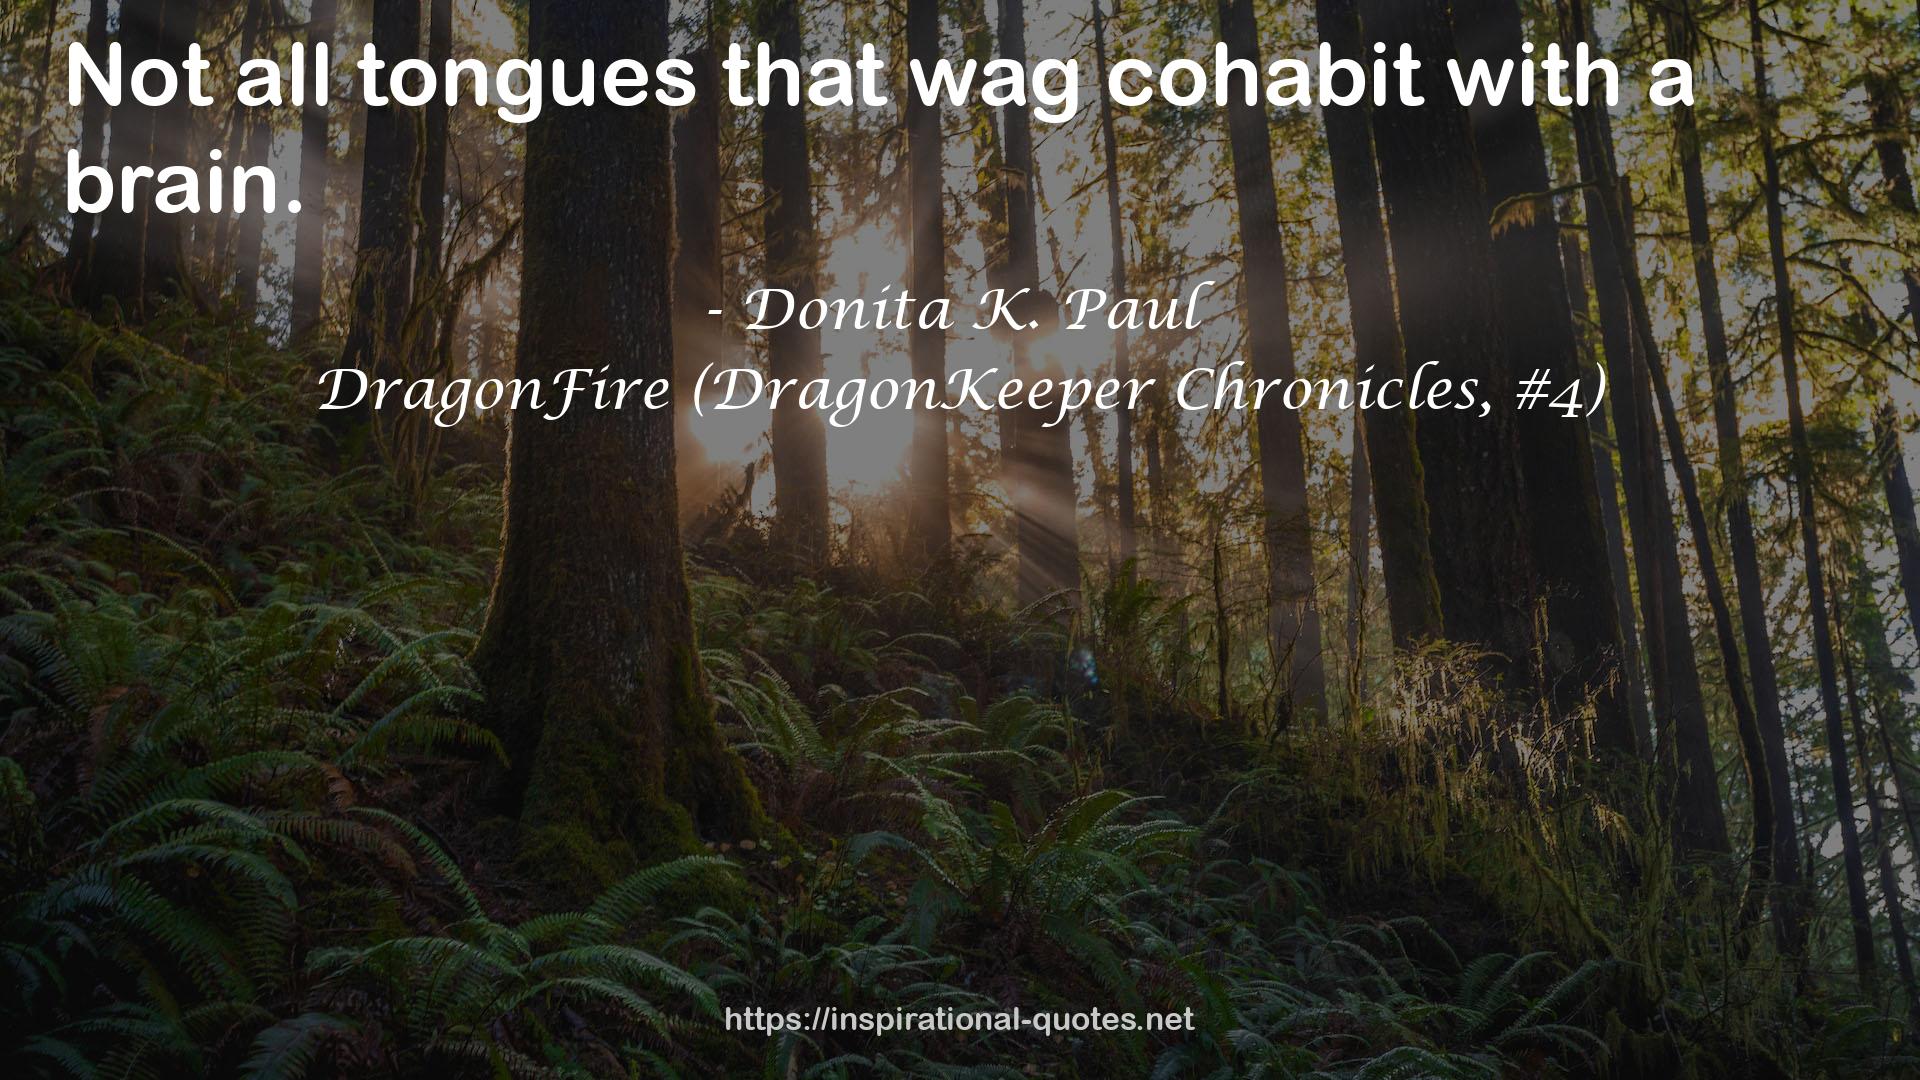 DragonFire (DragonKeeper Chronicles, #4) QUOTES